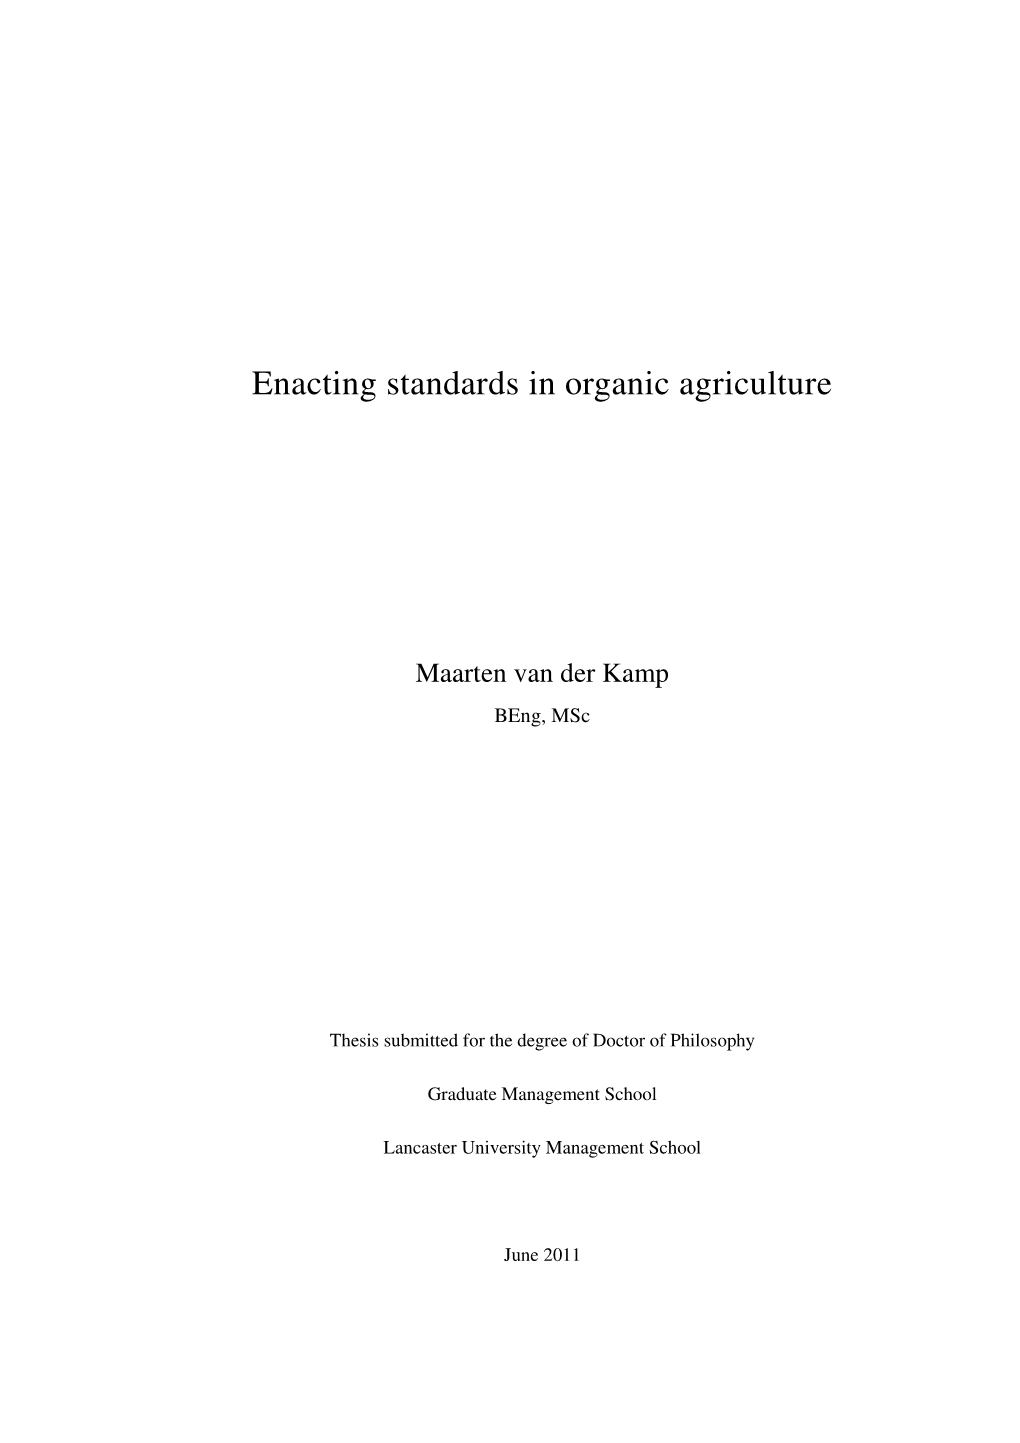 Enacting Standards in Organic Agriculture